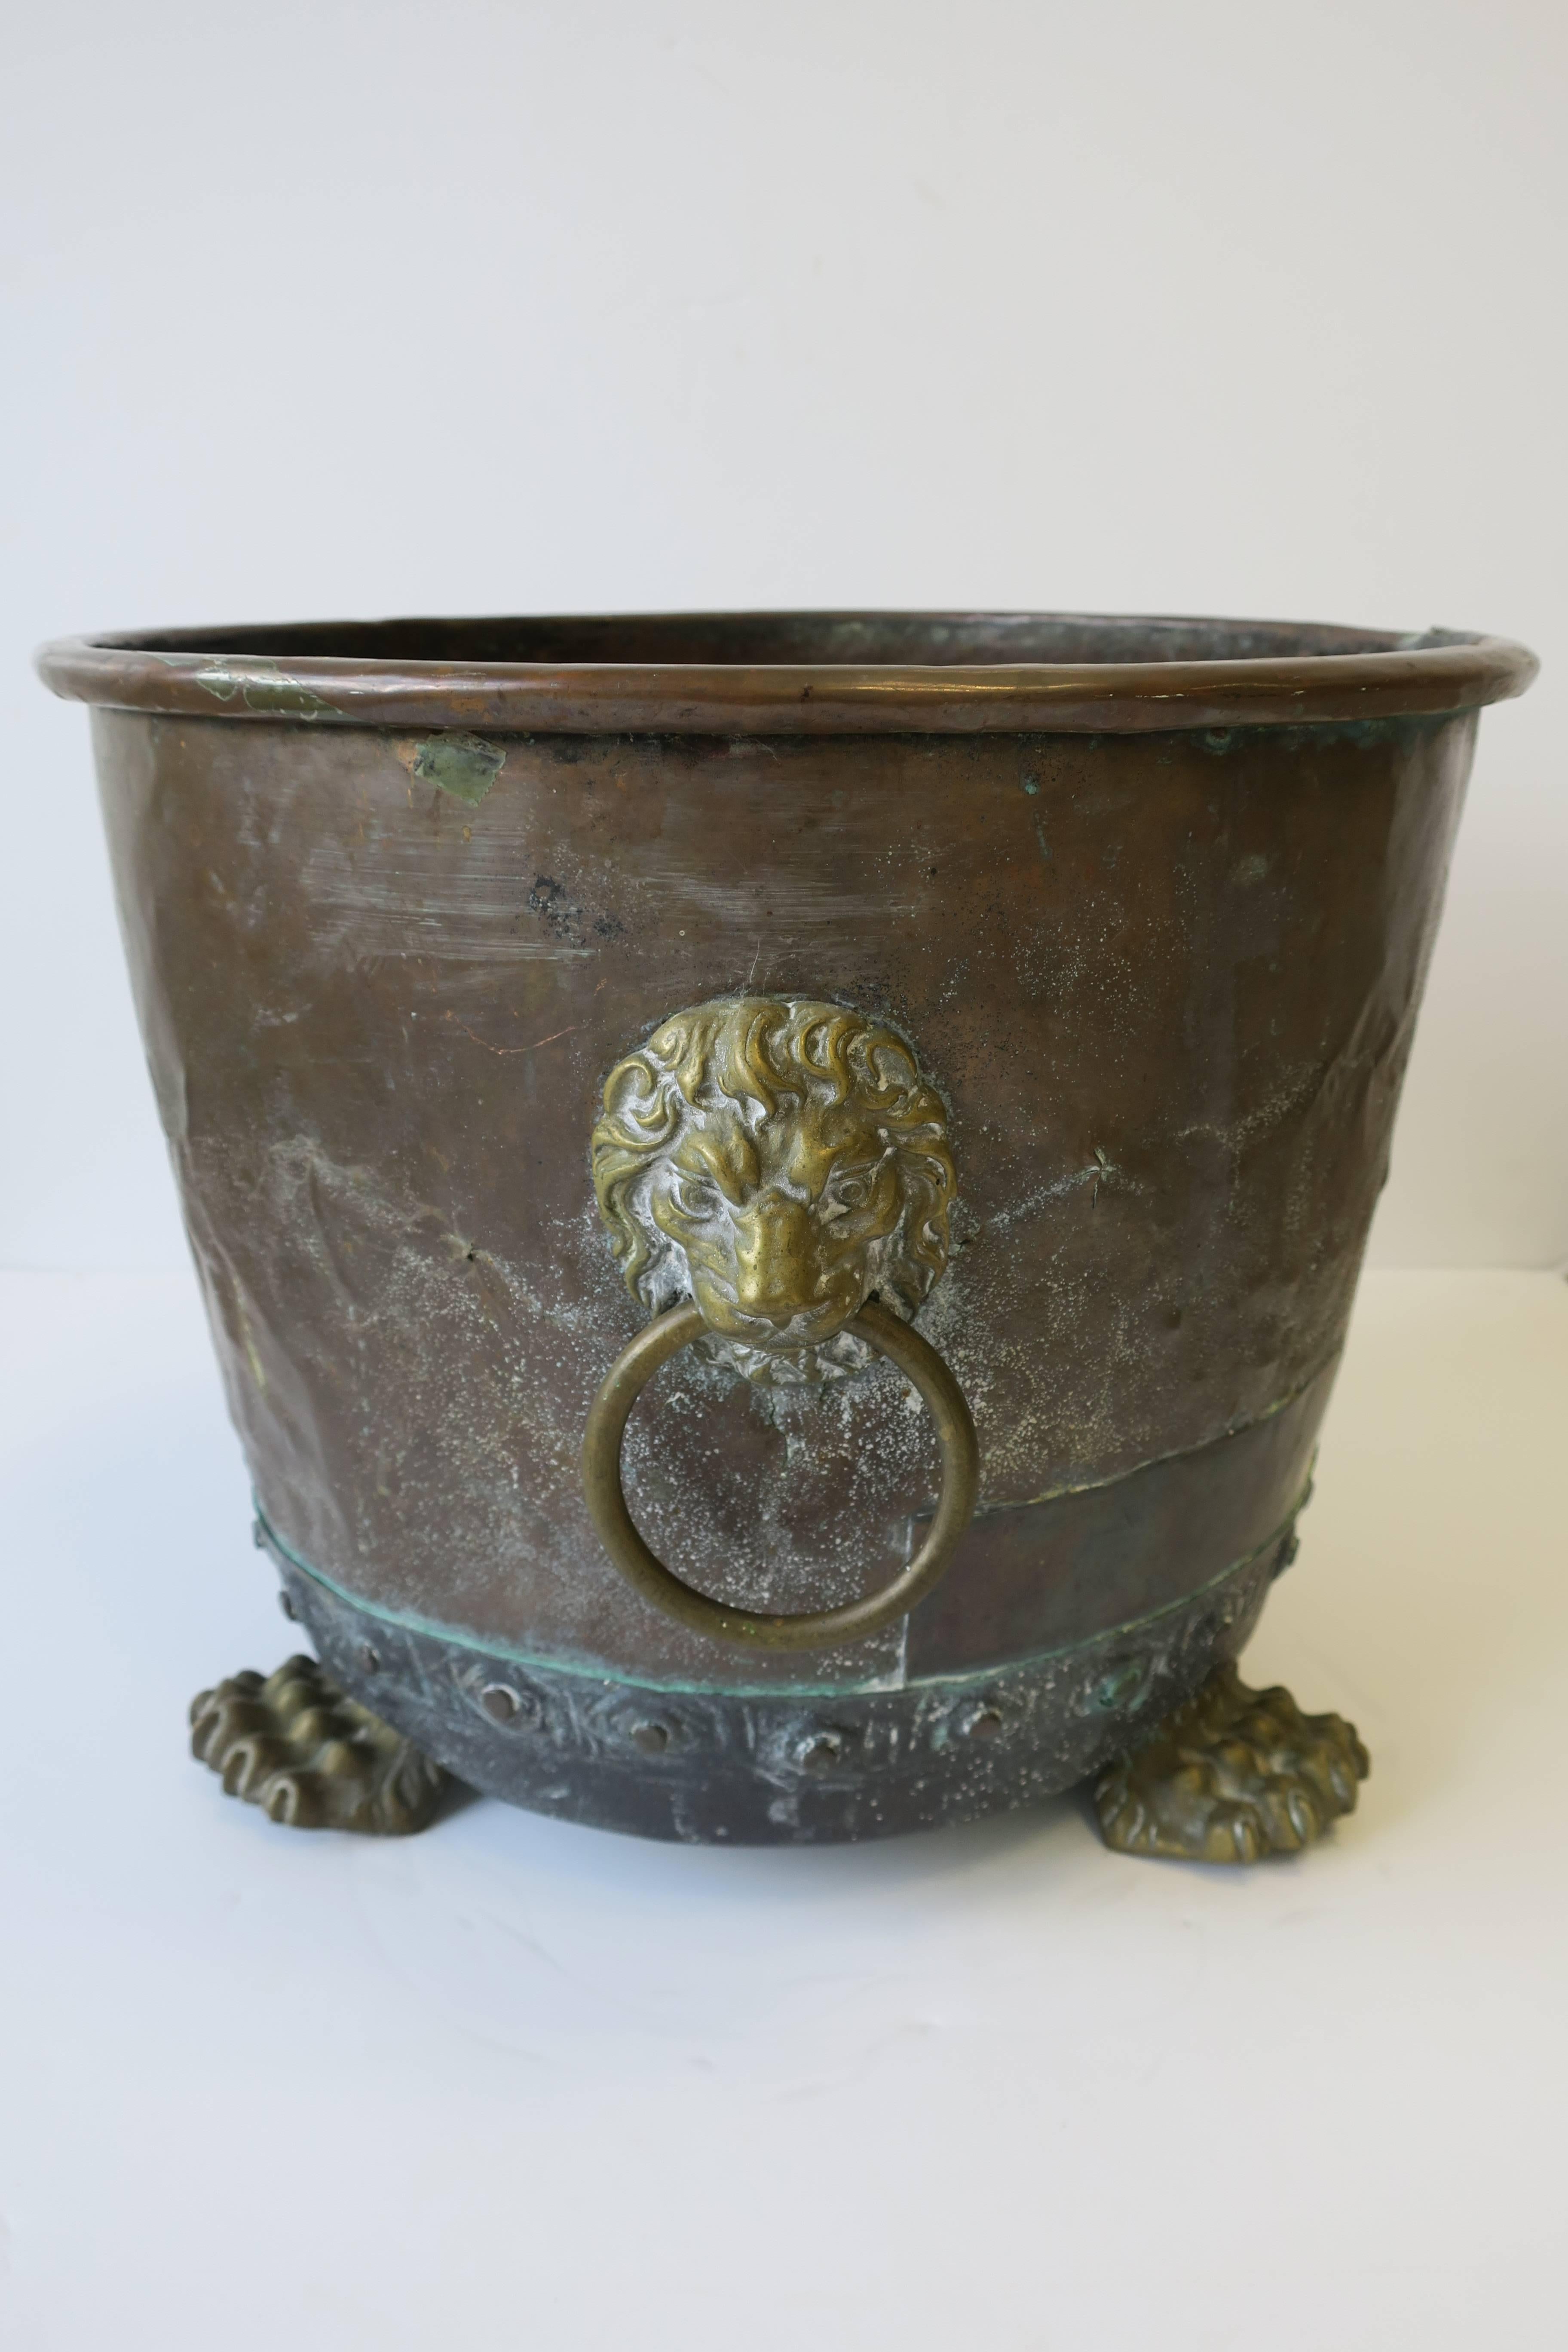 A beautiful and strong antique English brass and copper firewood log holder vessel with Lion details. Beautiful and detailed brass lion head's with ring loops and lion paw feet. Hardware details around base. Riveted construction with natural patina